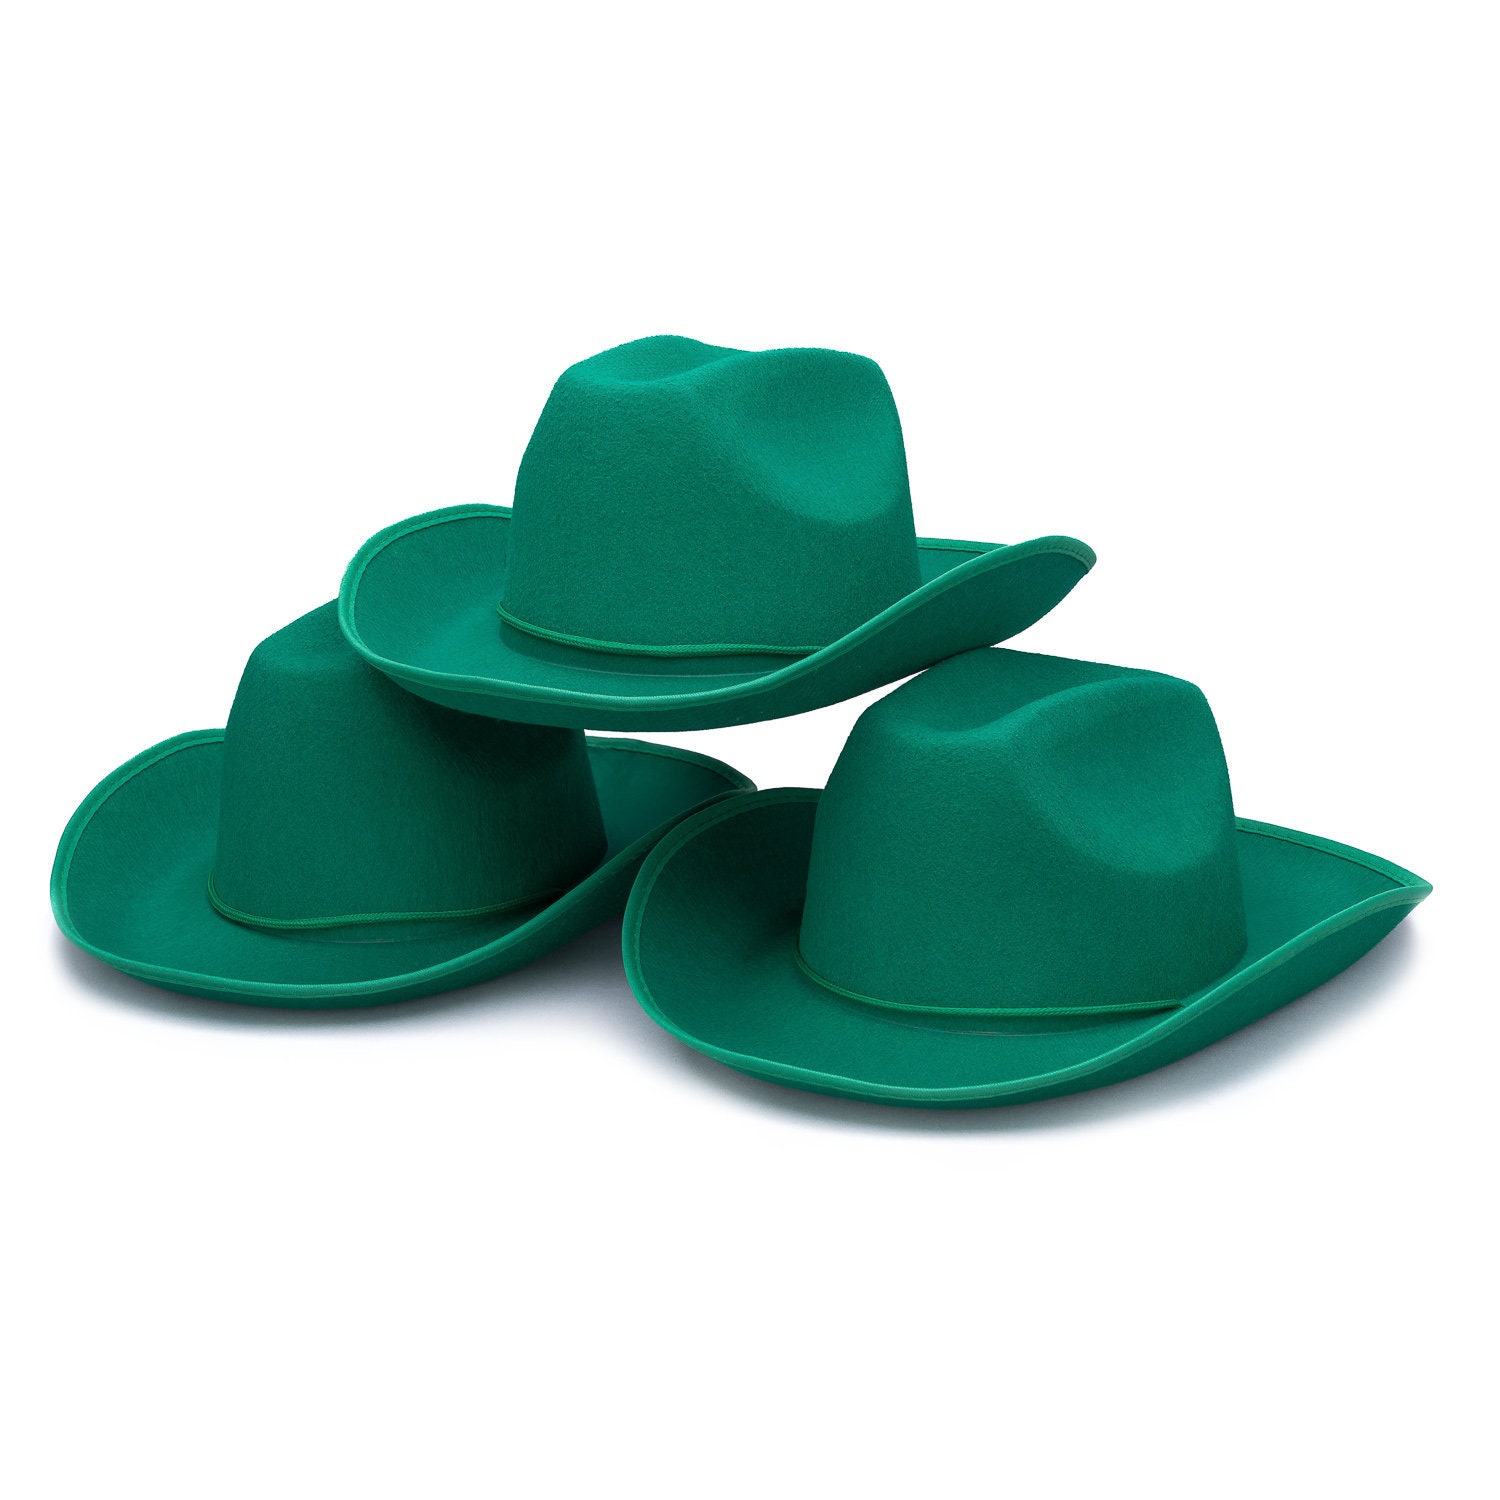 Cowboy drinking hat w/ straw for St.Patrick's Day